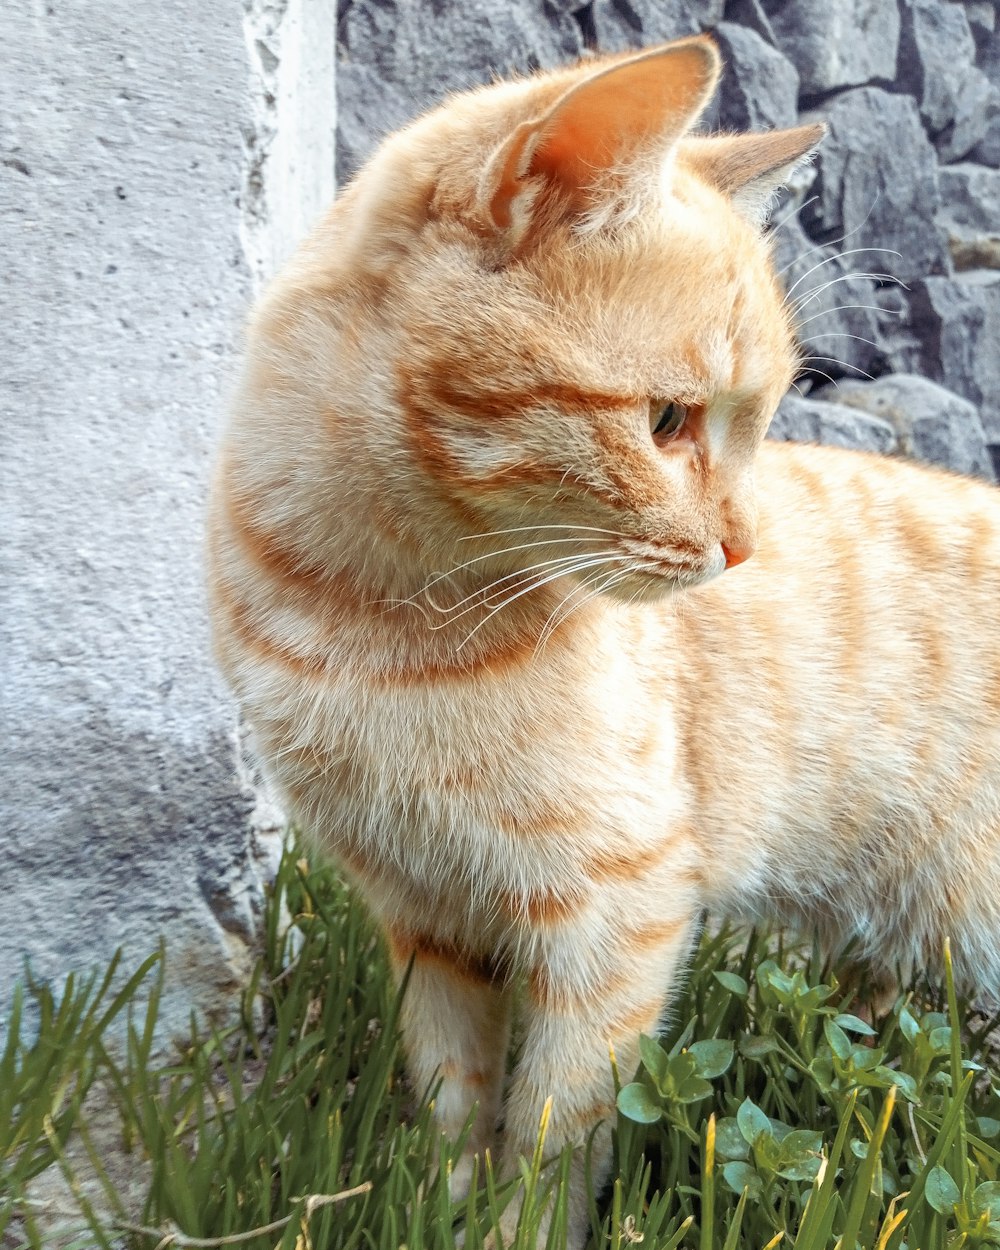 an orange and white cat standing in the grass